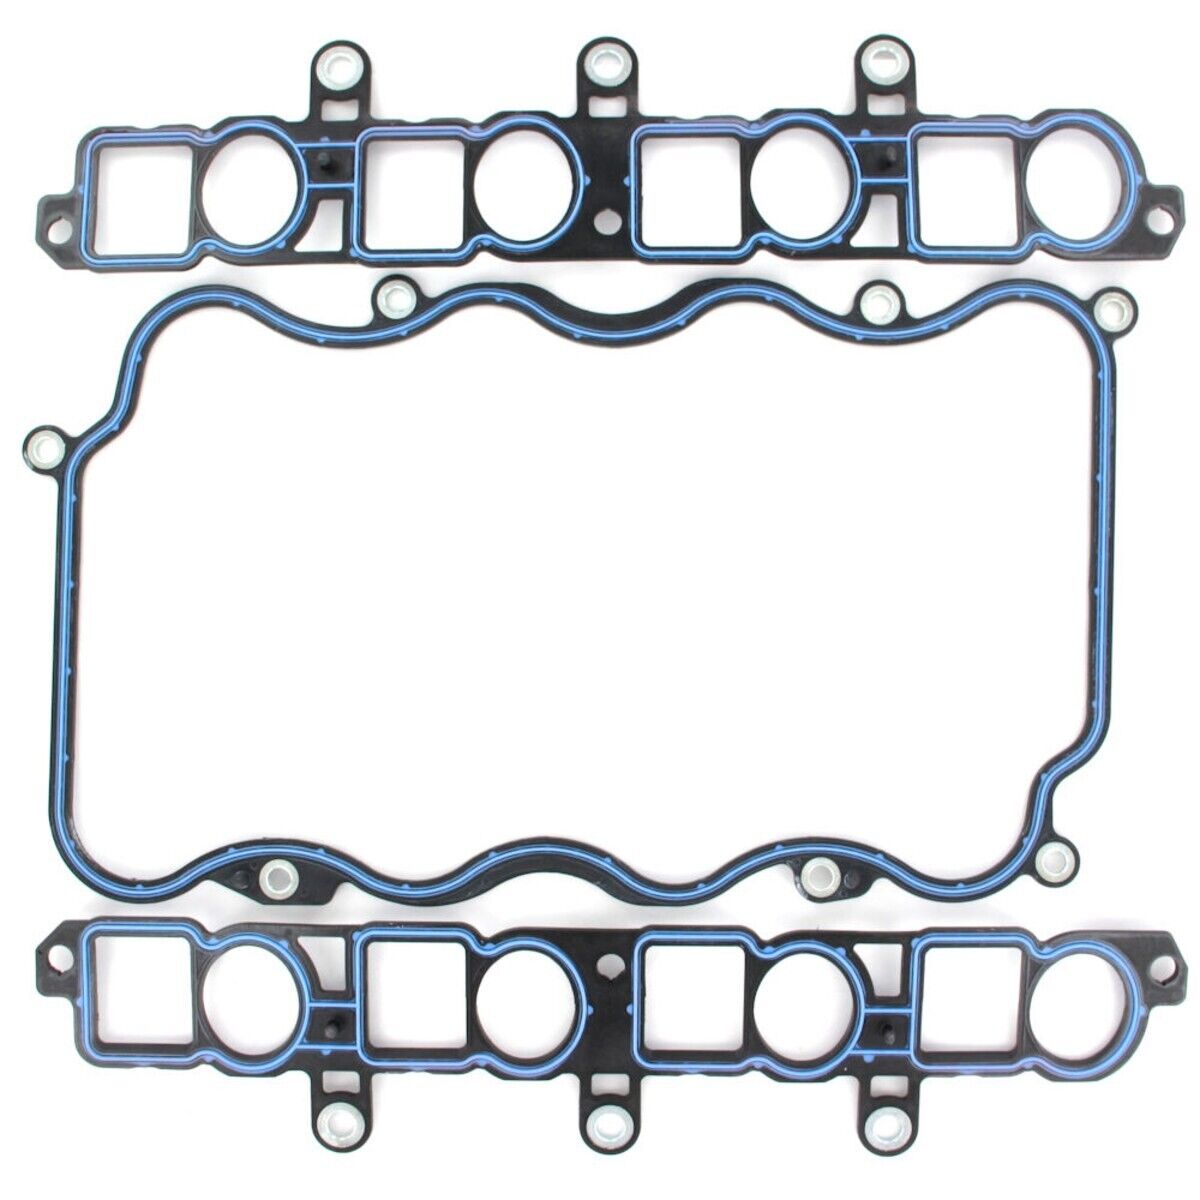 AMS4701 APEX Set Intake Manifold Gaskets for Ford Mustang 1996-1998